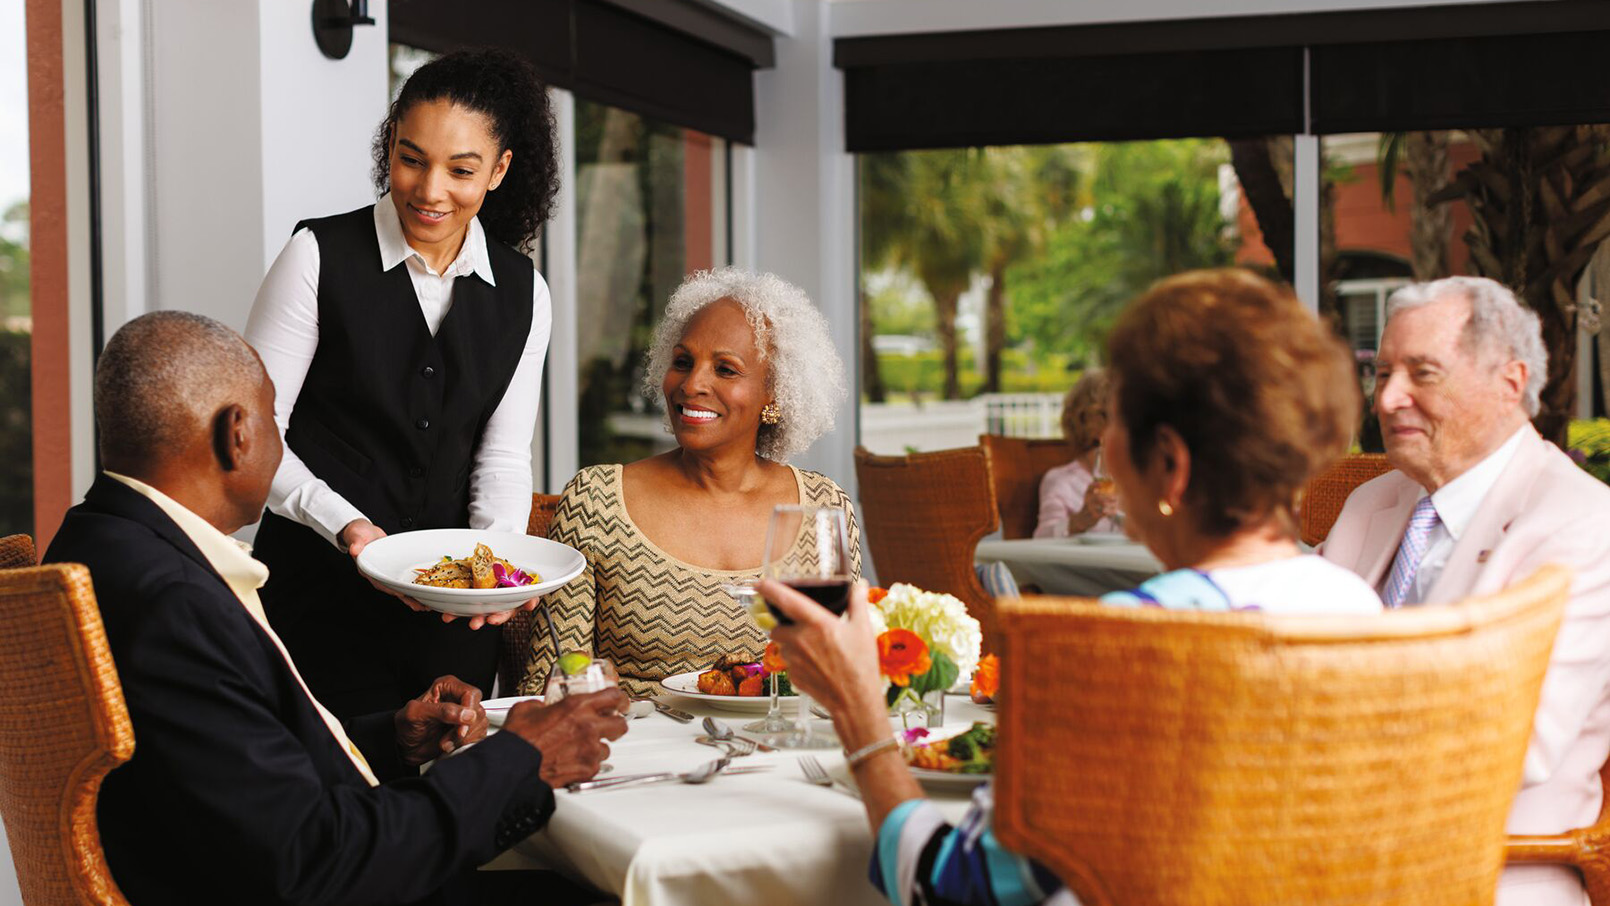 Residents enjoying a delicious meal together in the warm ambiance of our senior living community's dining area.